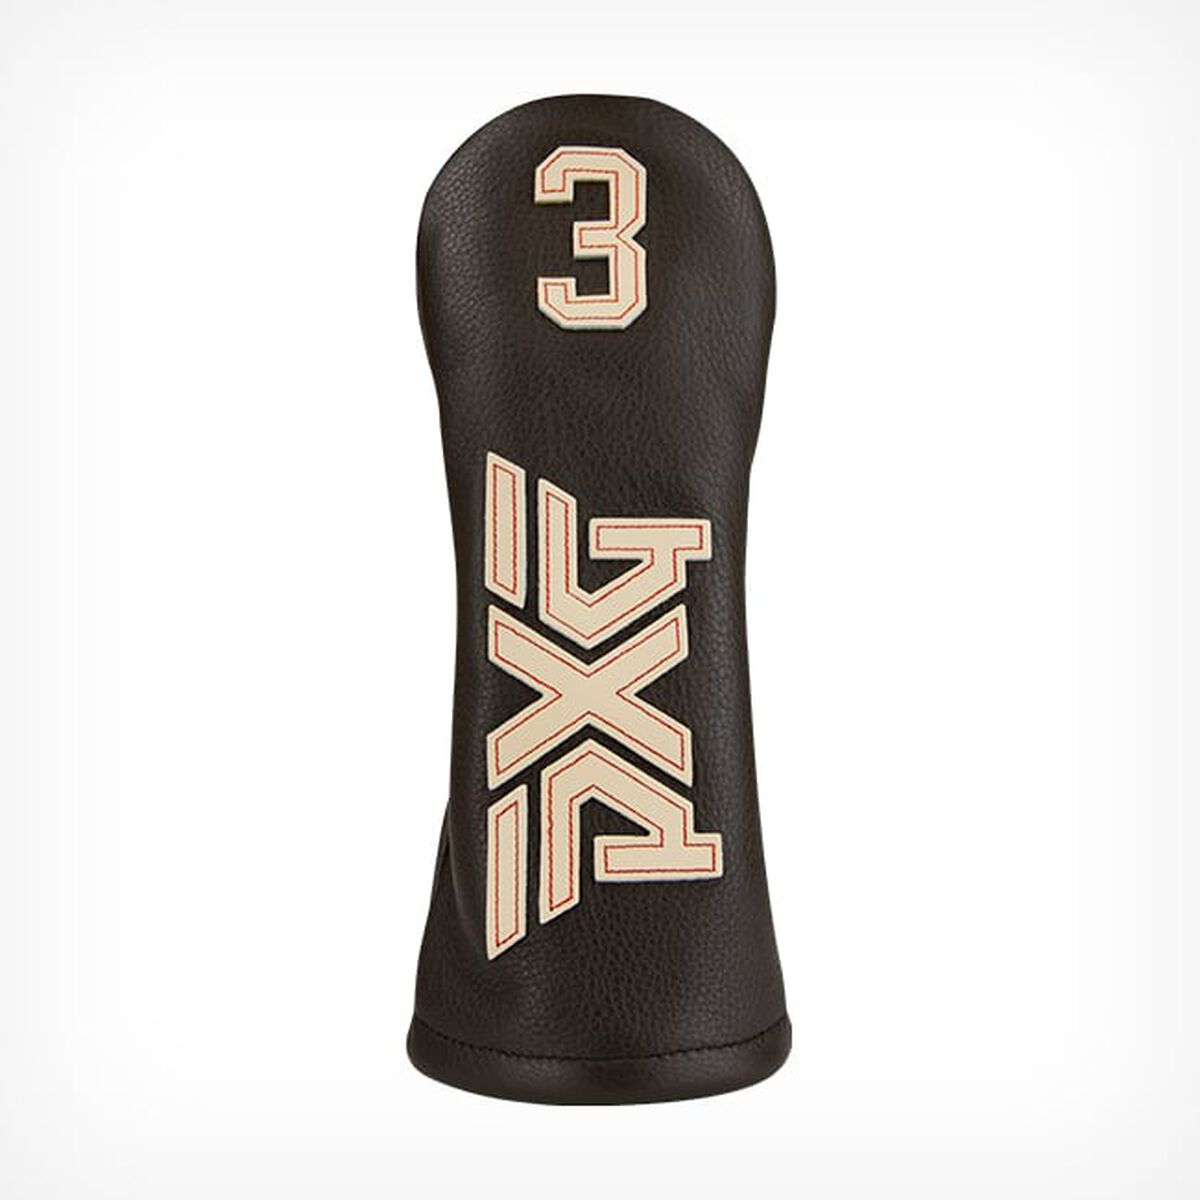 PXG Lifted Fairway Wood Headcover 